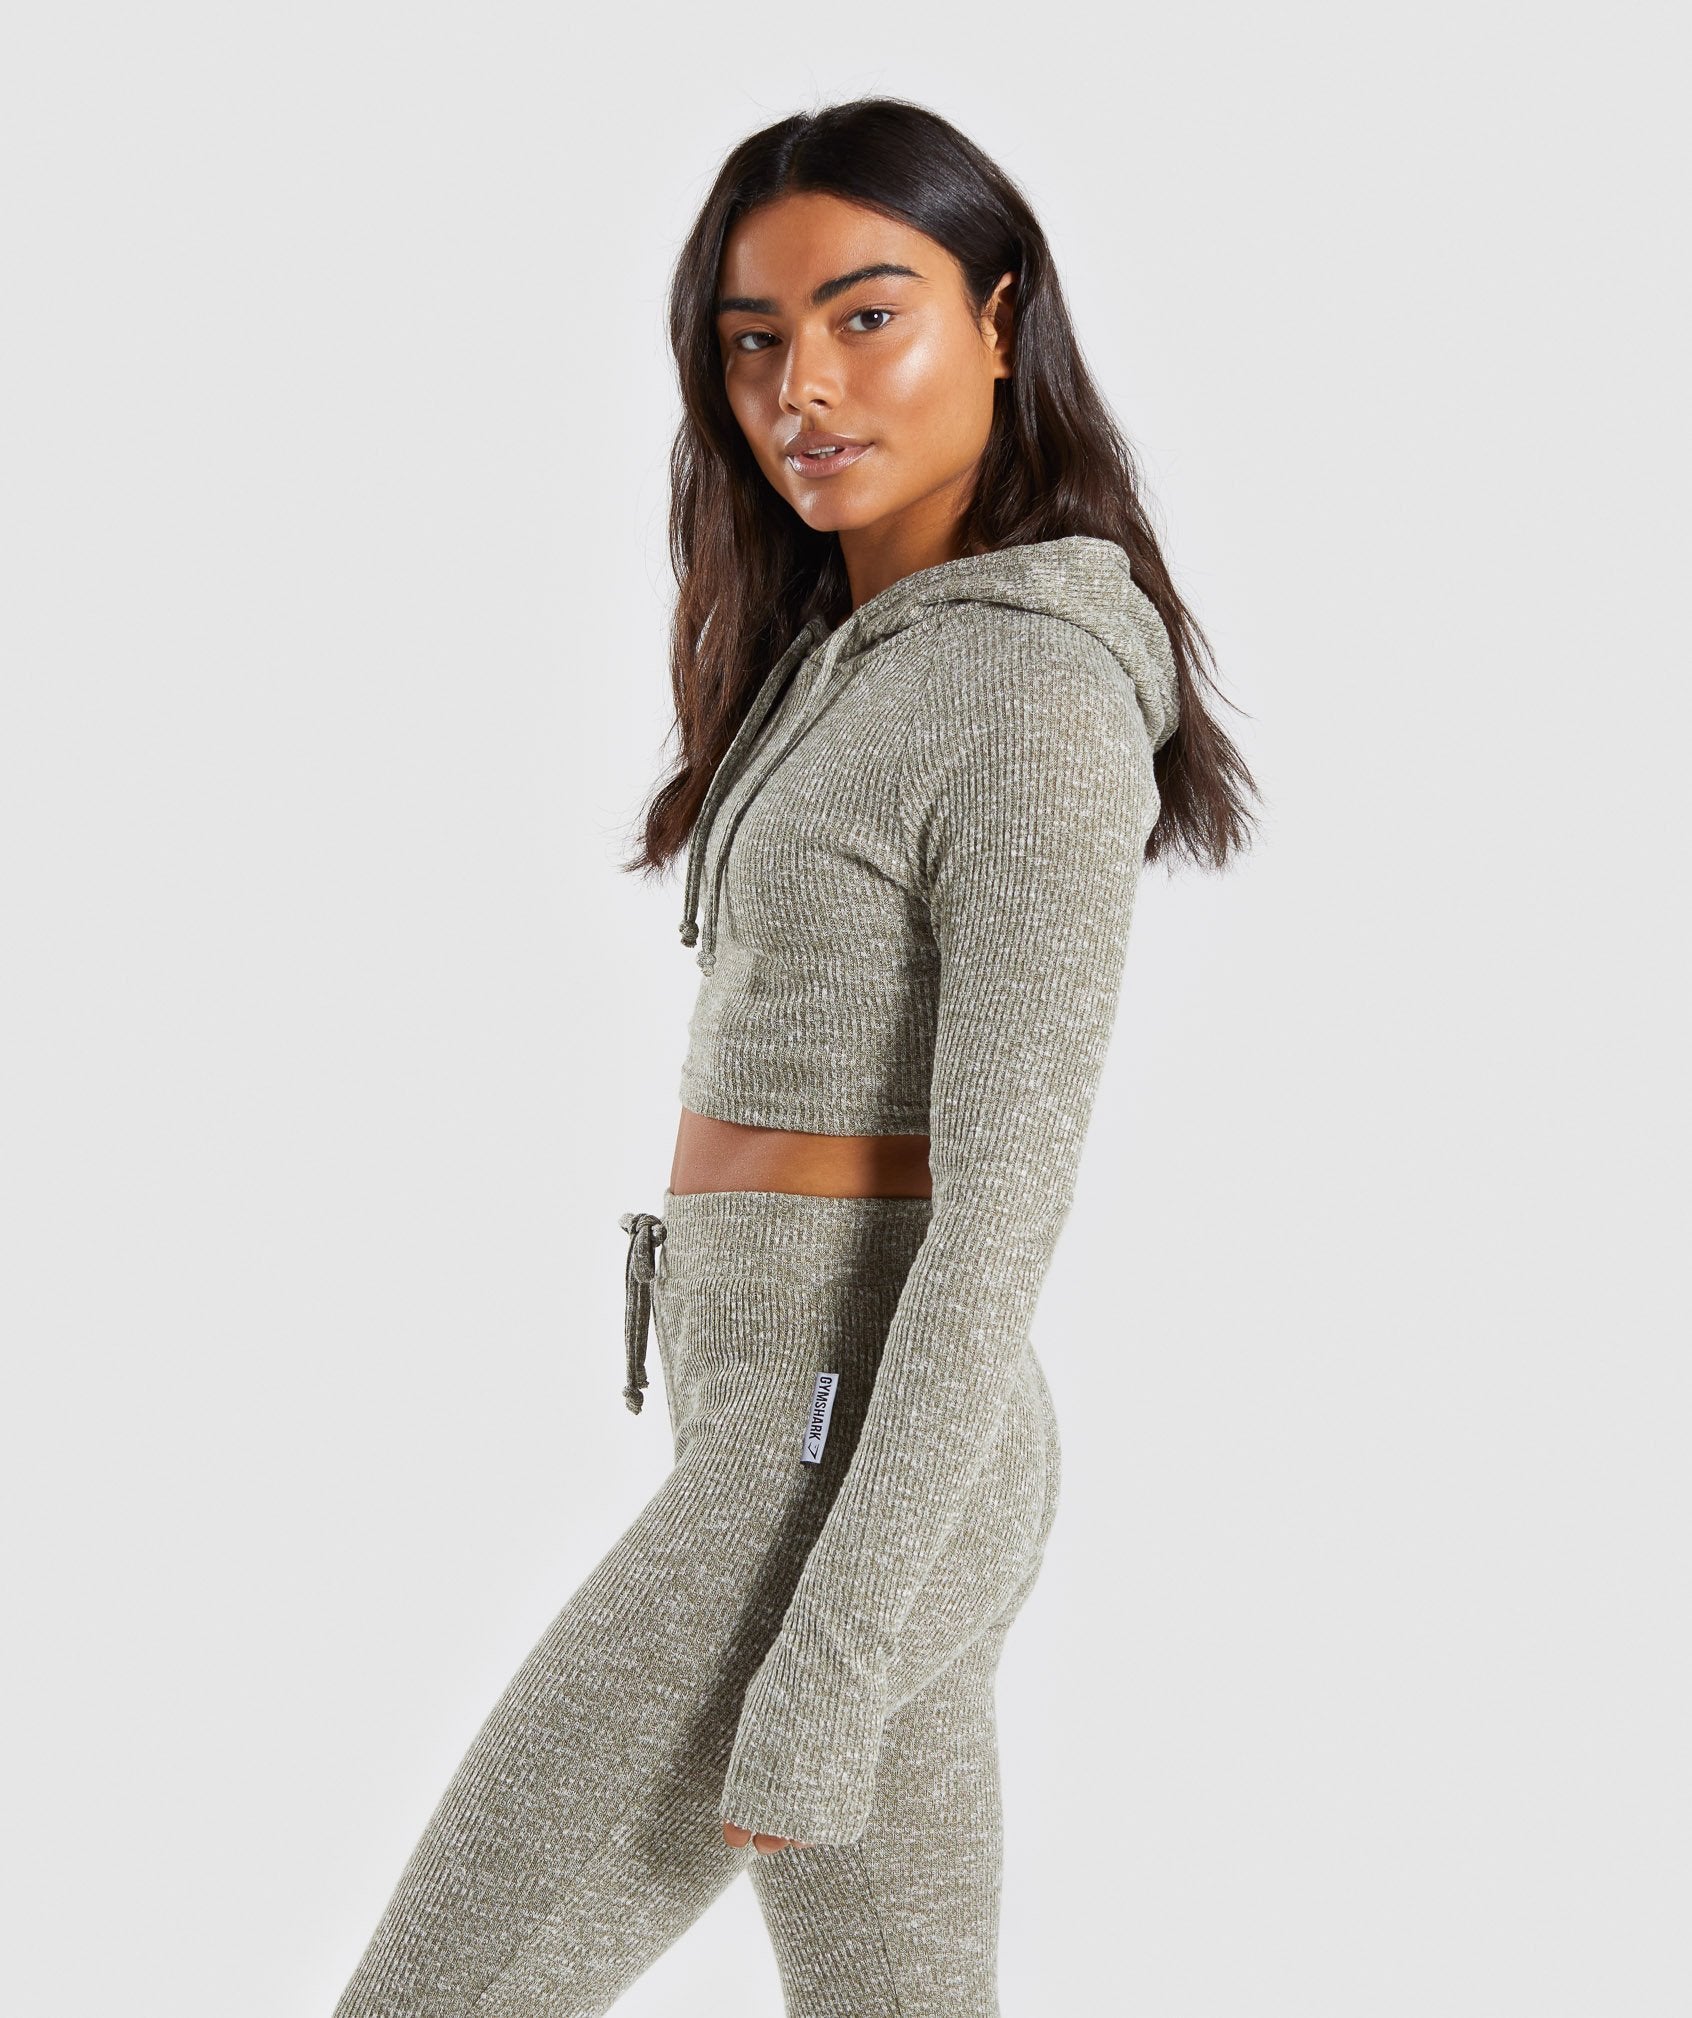 Slounge Cropped Hoodie in Washed Khaki Marl - view 3